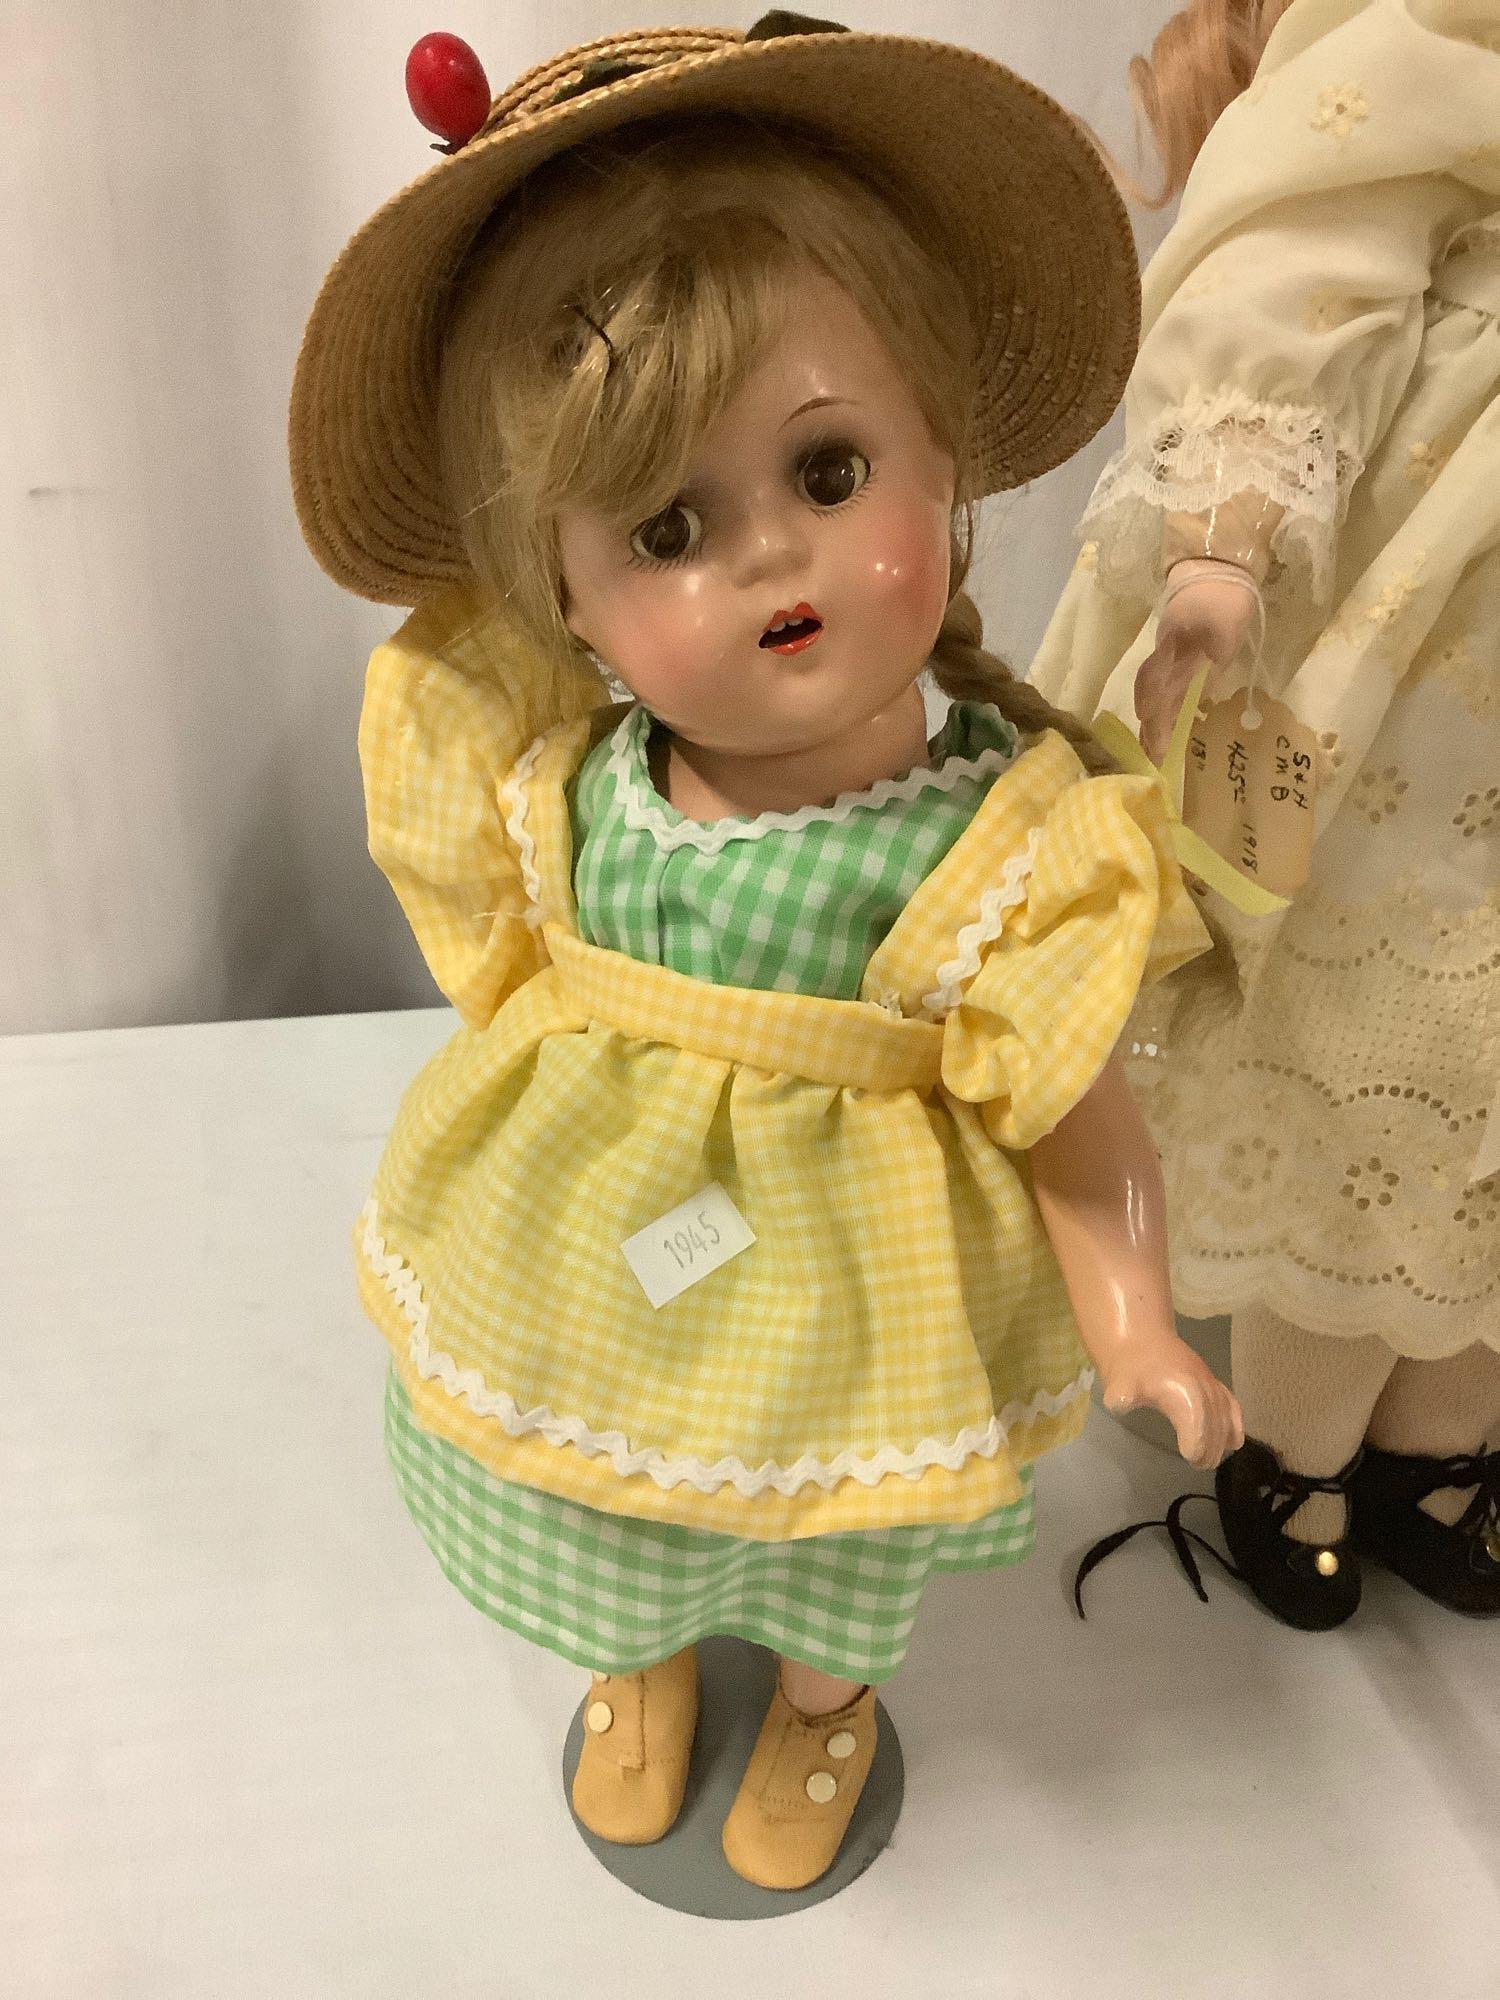 German All-Bisque Doll by Kestner, Model 102, with Yellow Boots 1100/1600  Auctions Online, Proxibid